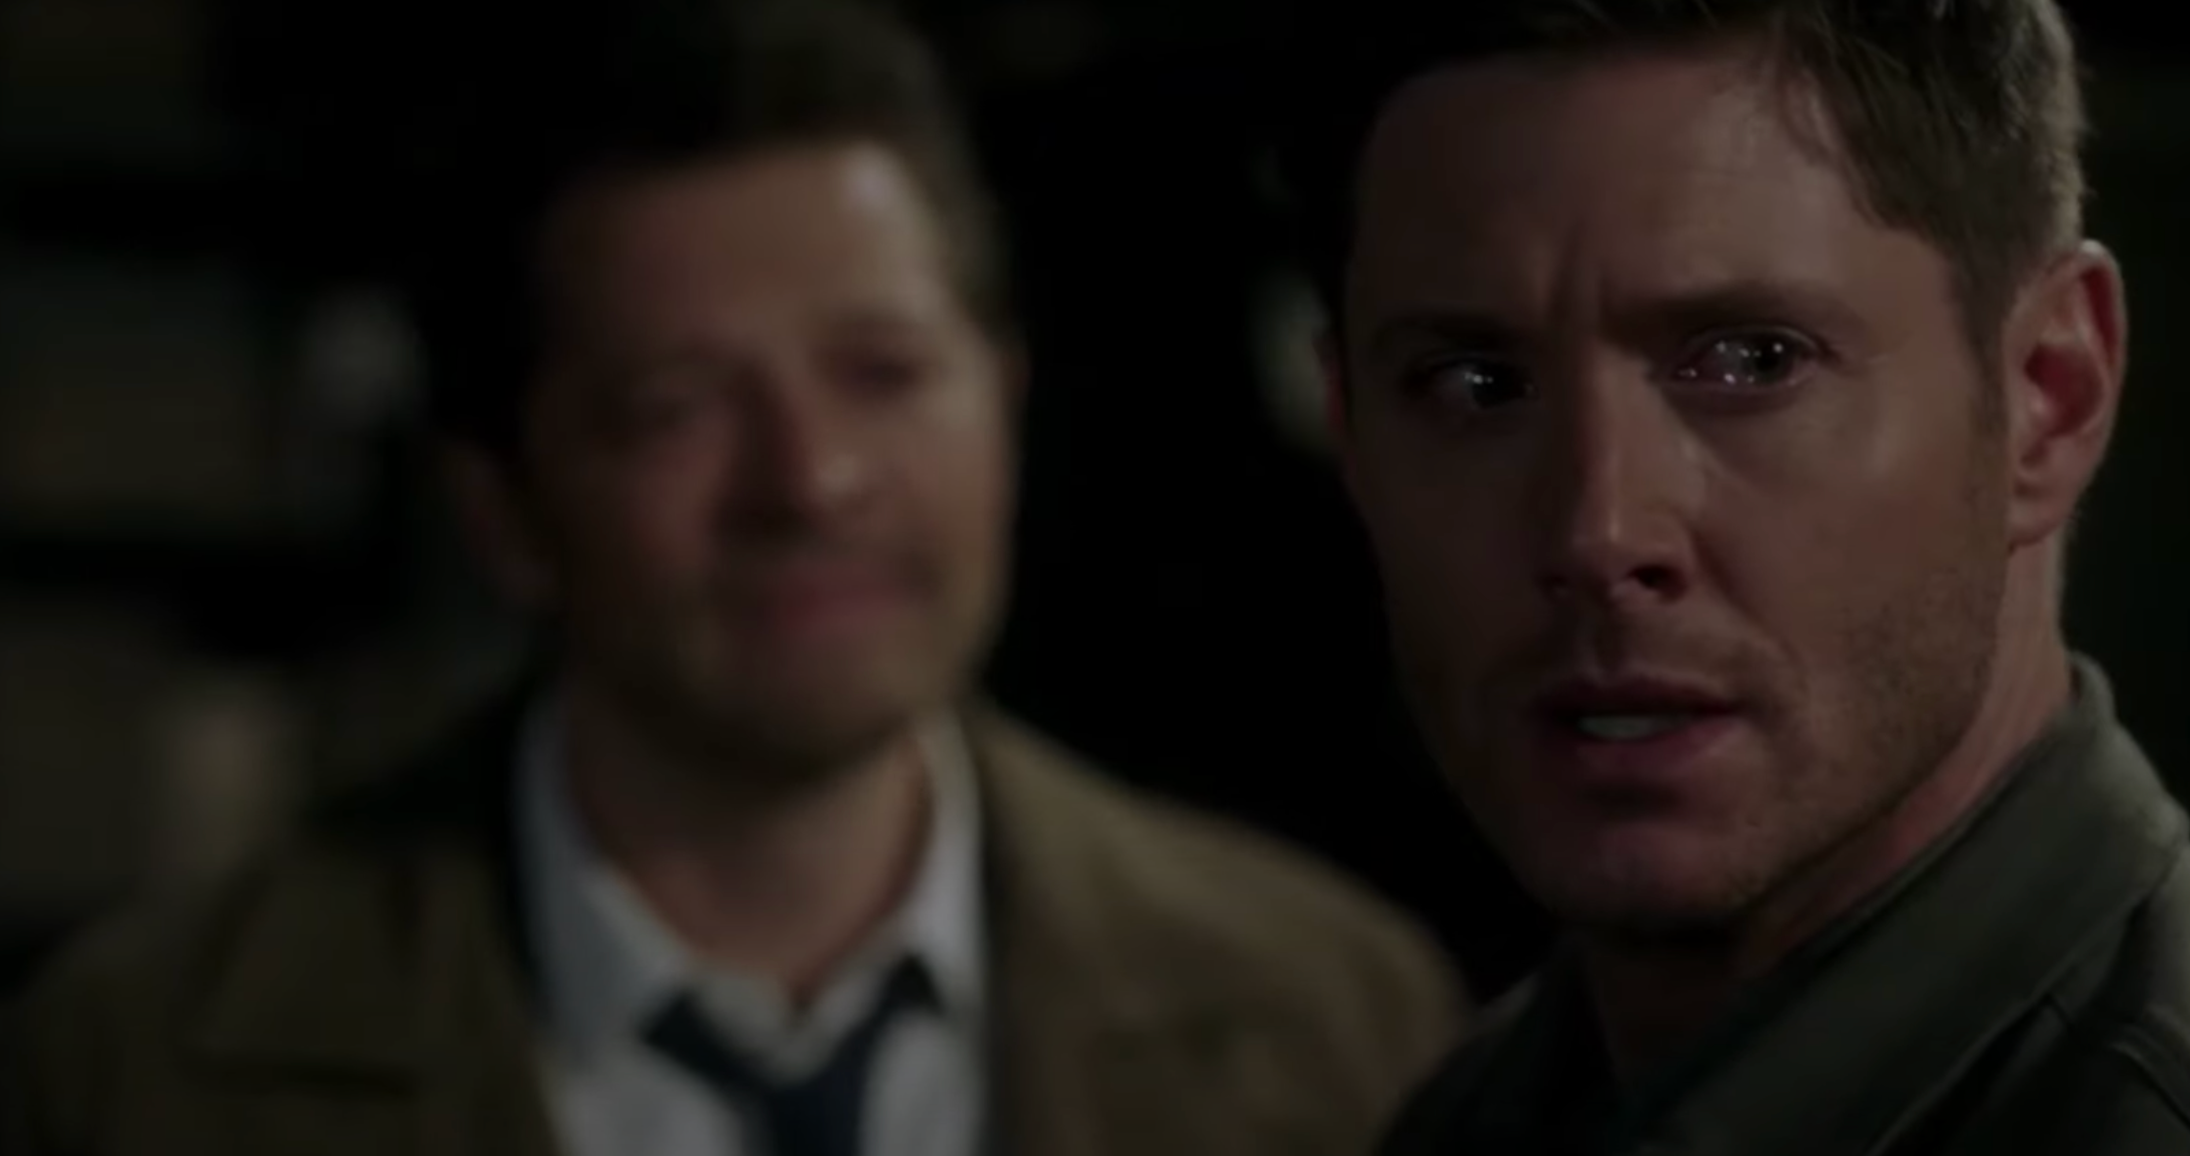 Is Destiel Canon? It Seems to Be, but Not for English Viewers